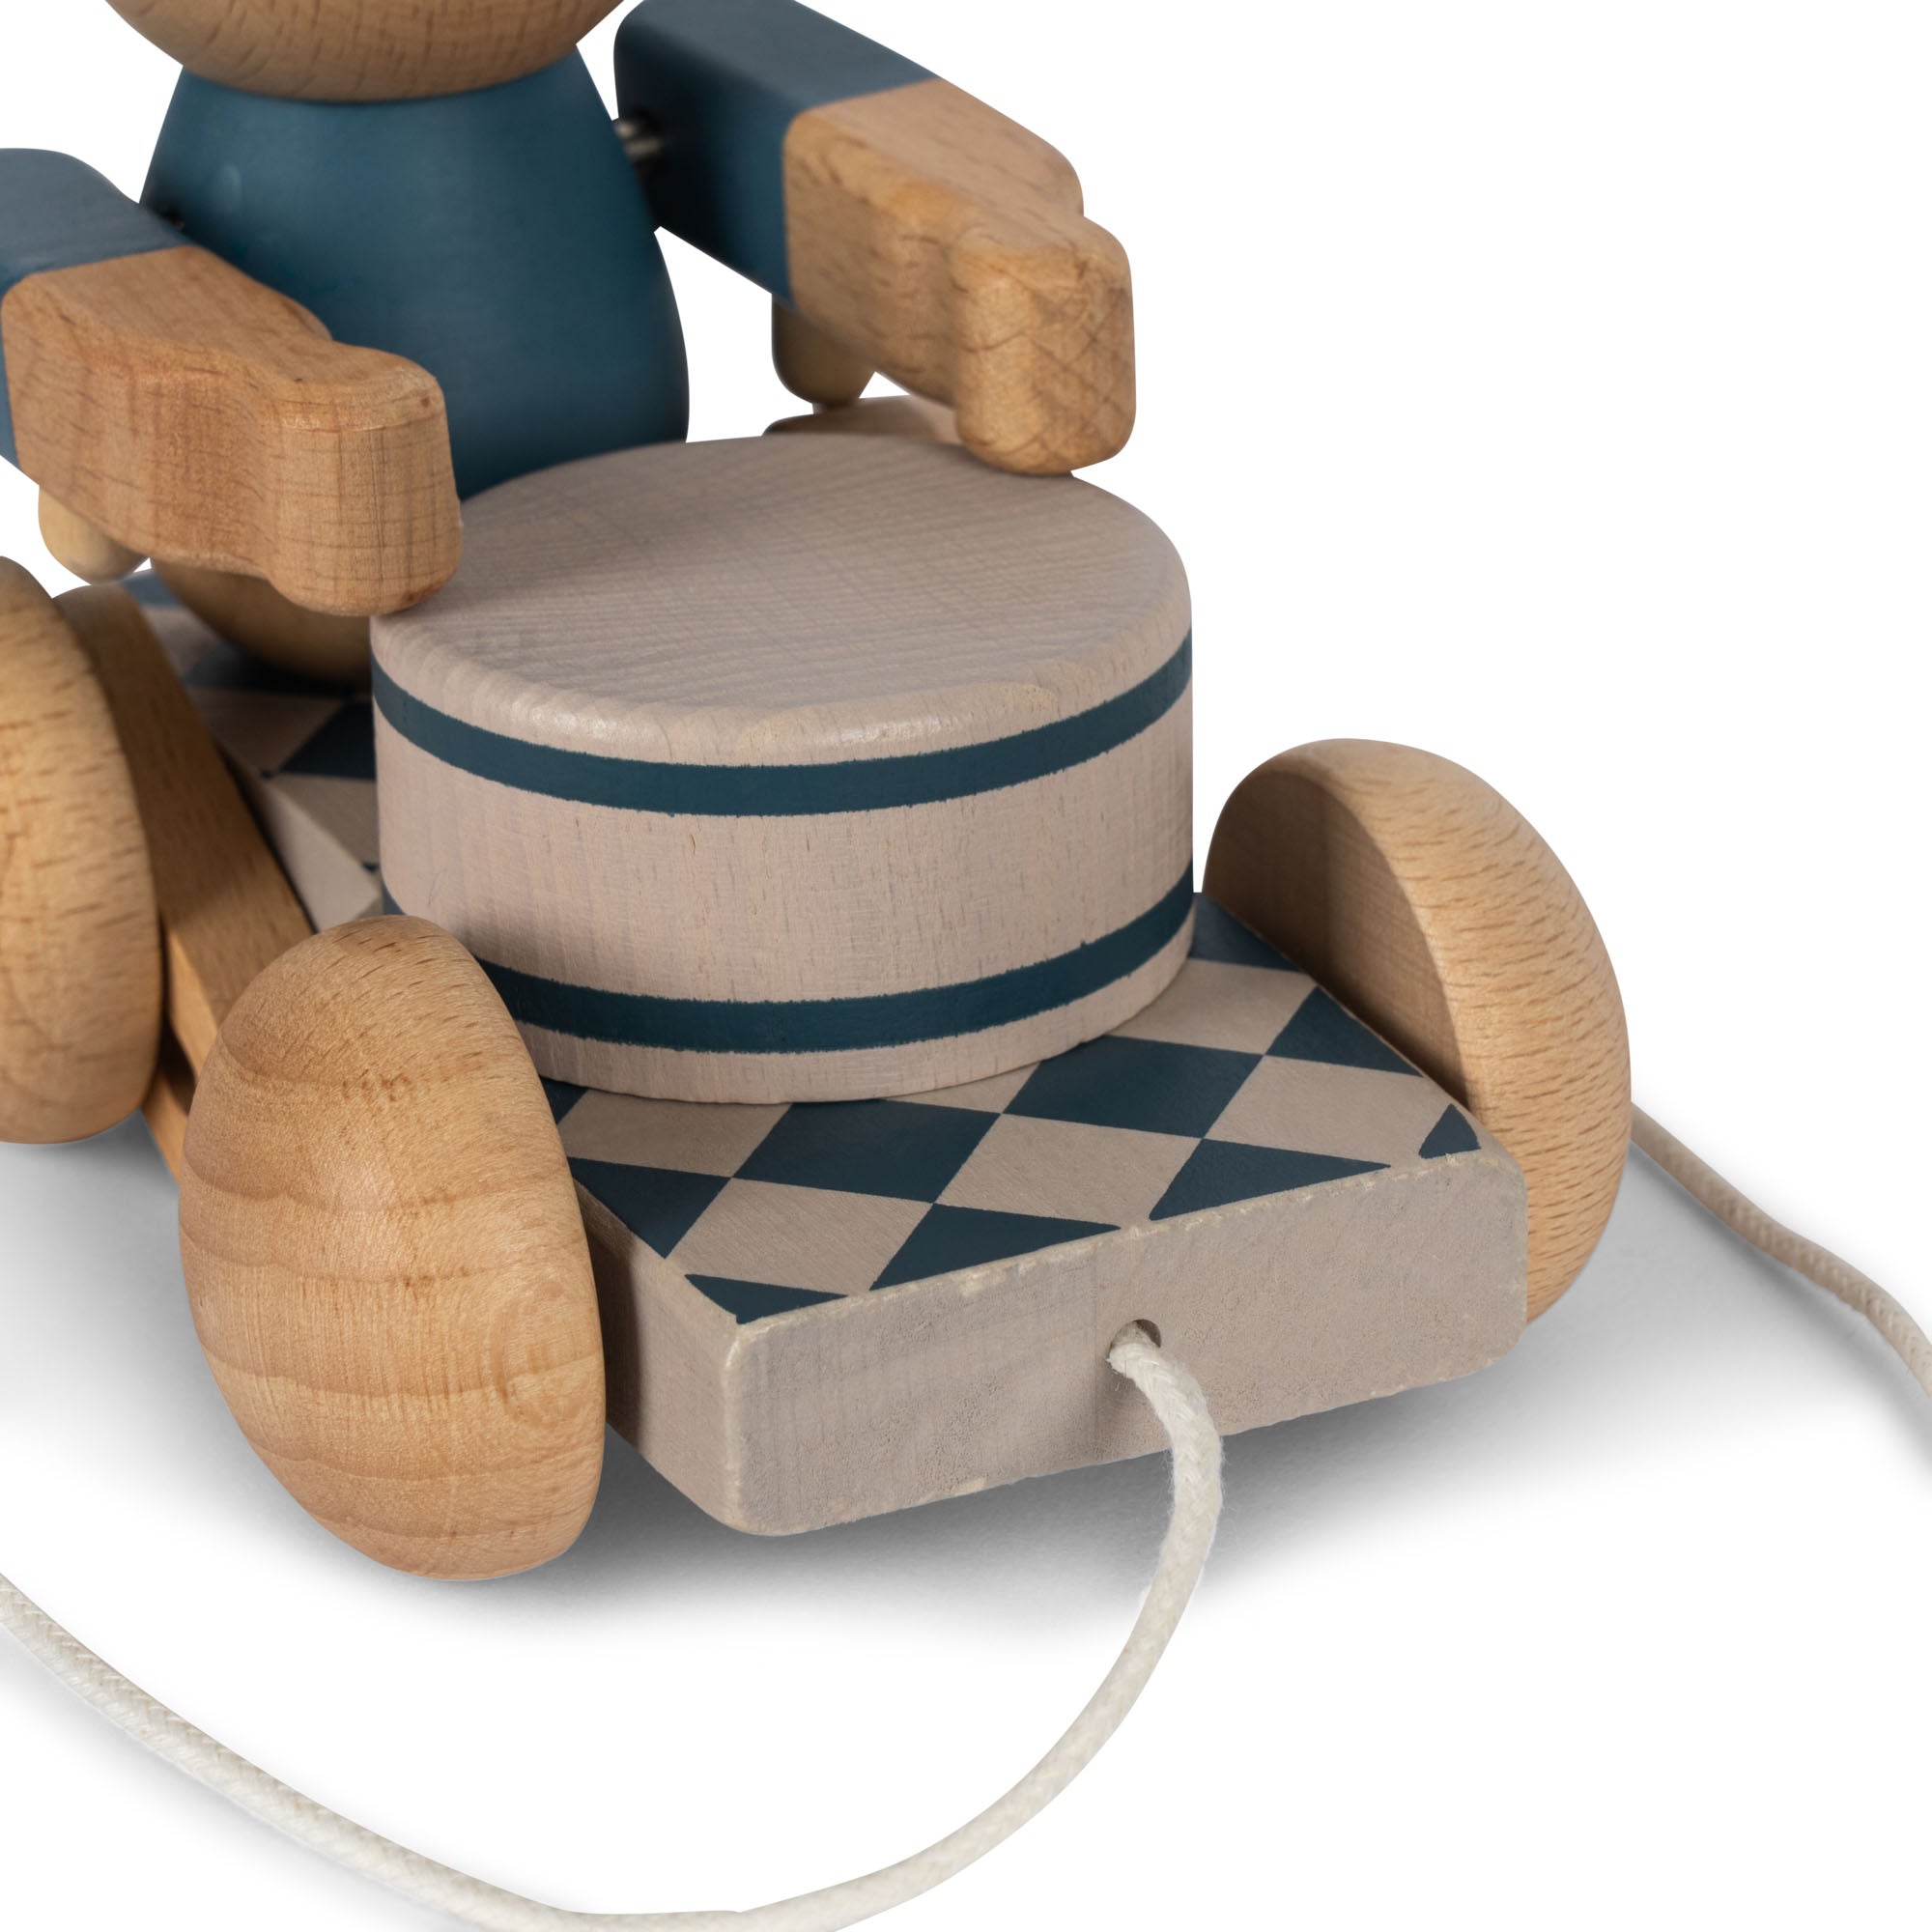 Wooden Musical Pull Bear: Melodic Toy